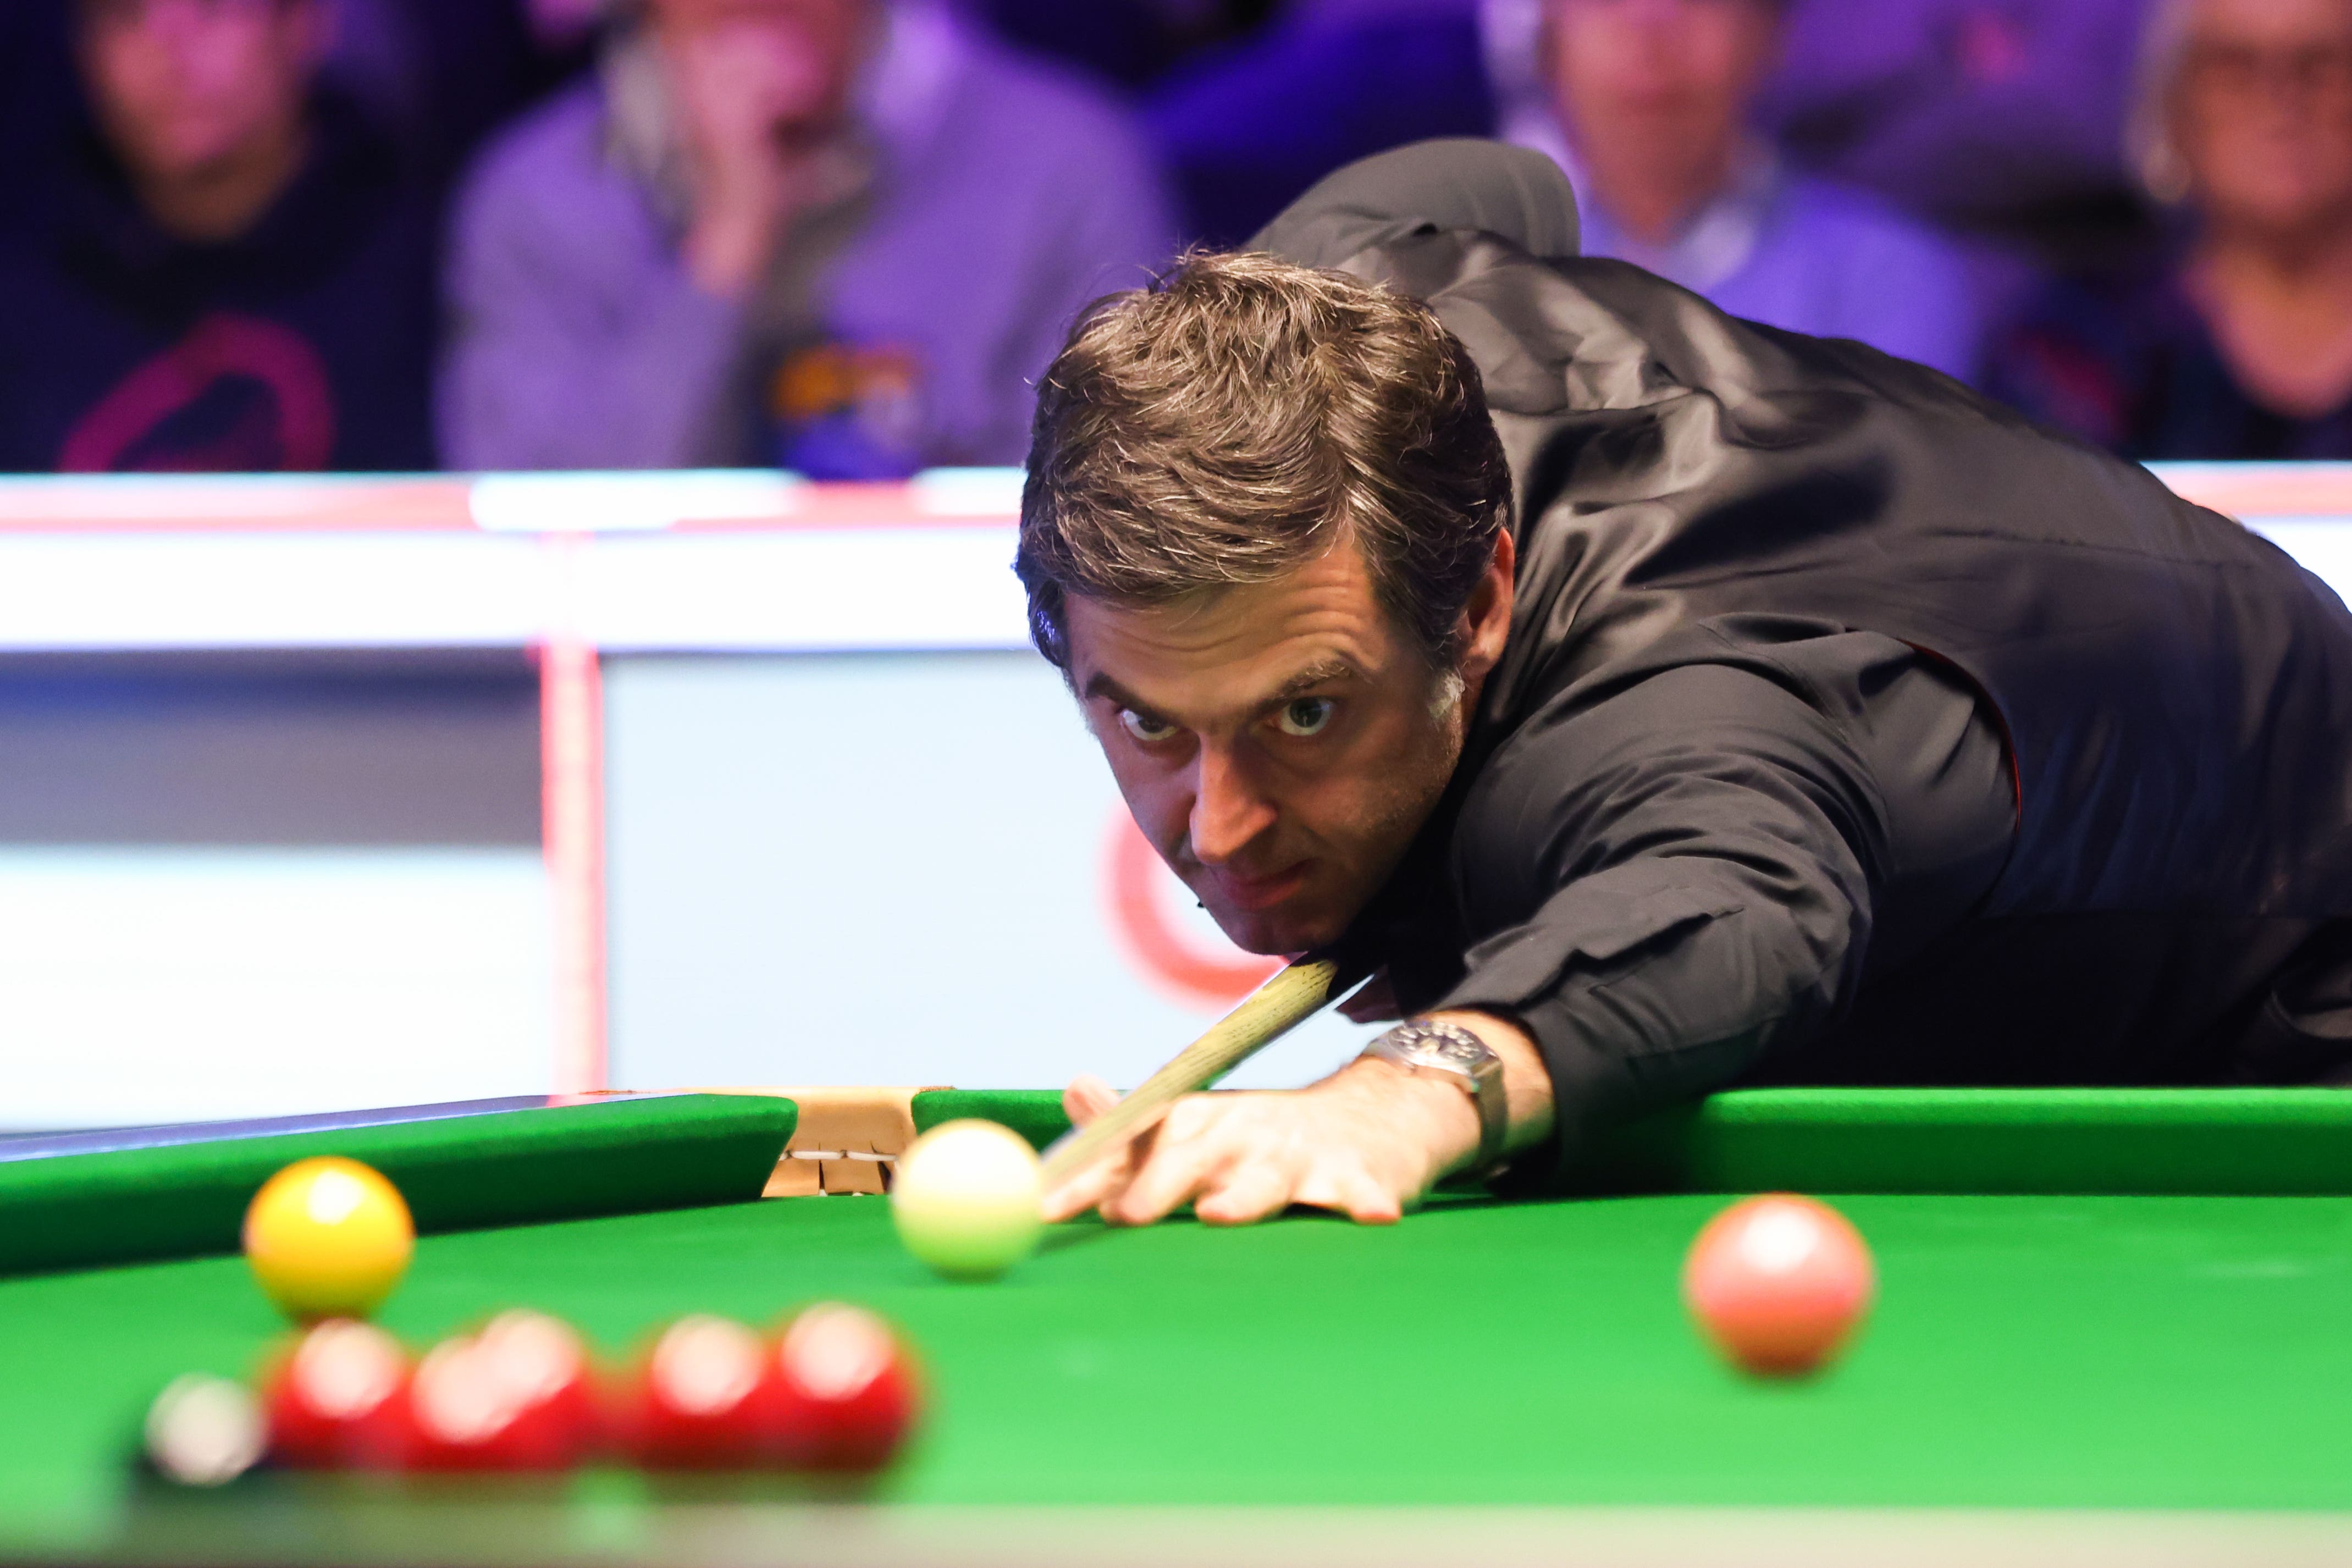 Ronnie O’Sullivan cruised into the quarter-finals of the UK Championship